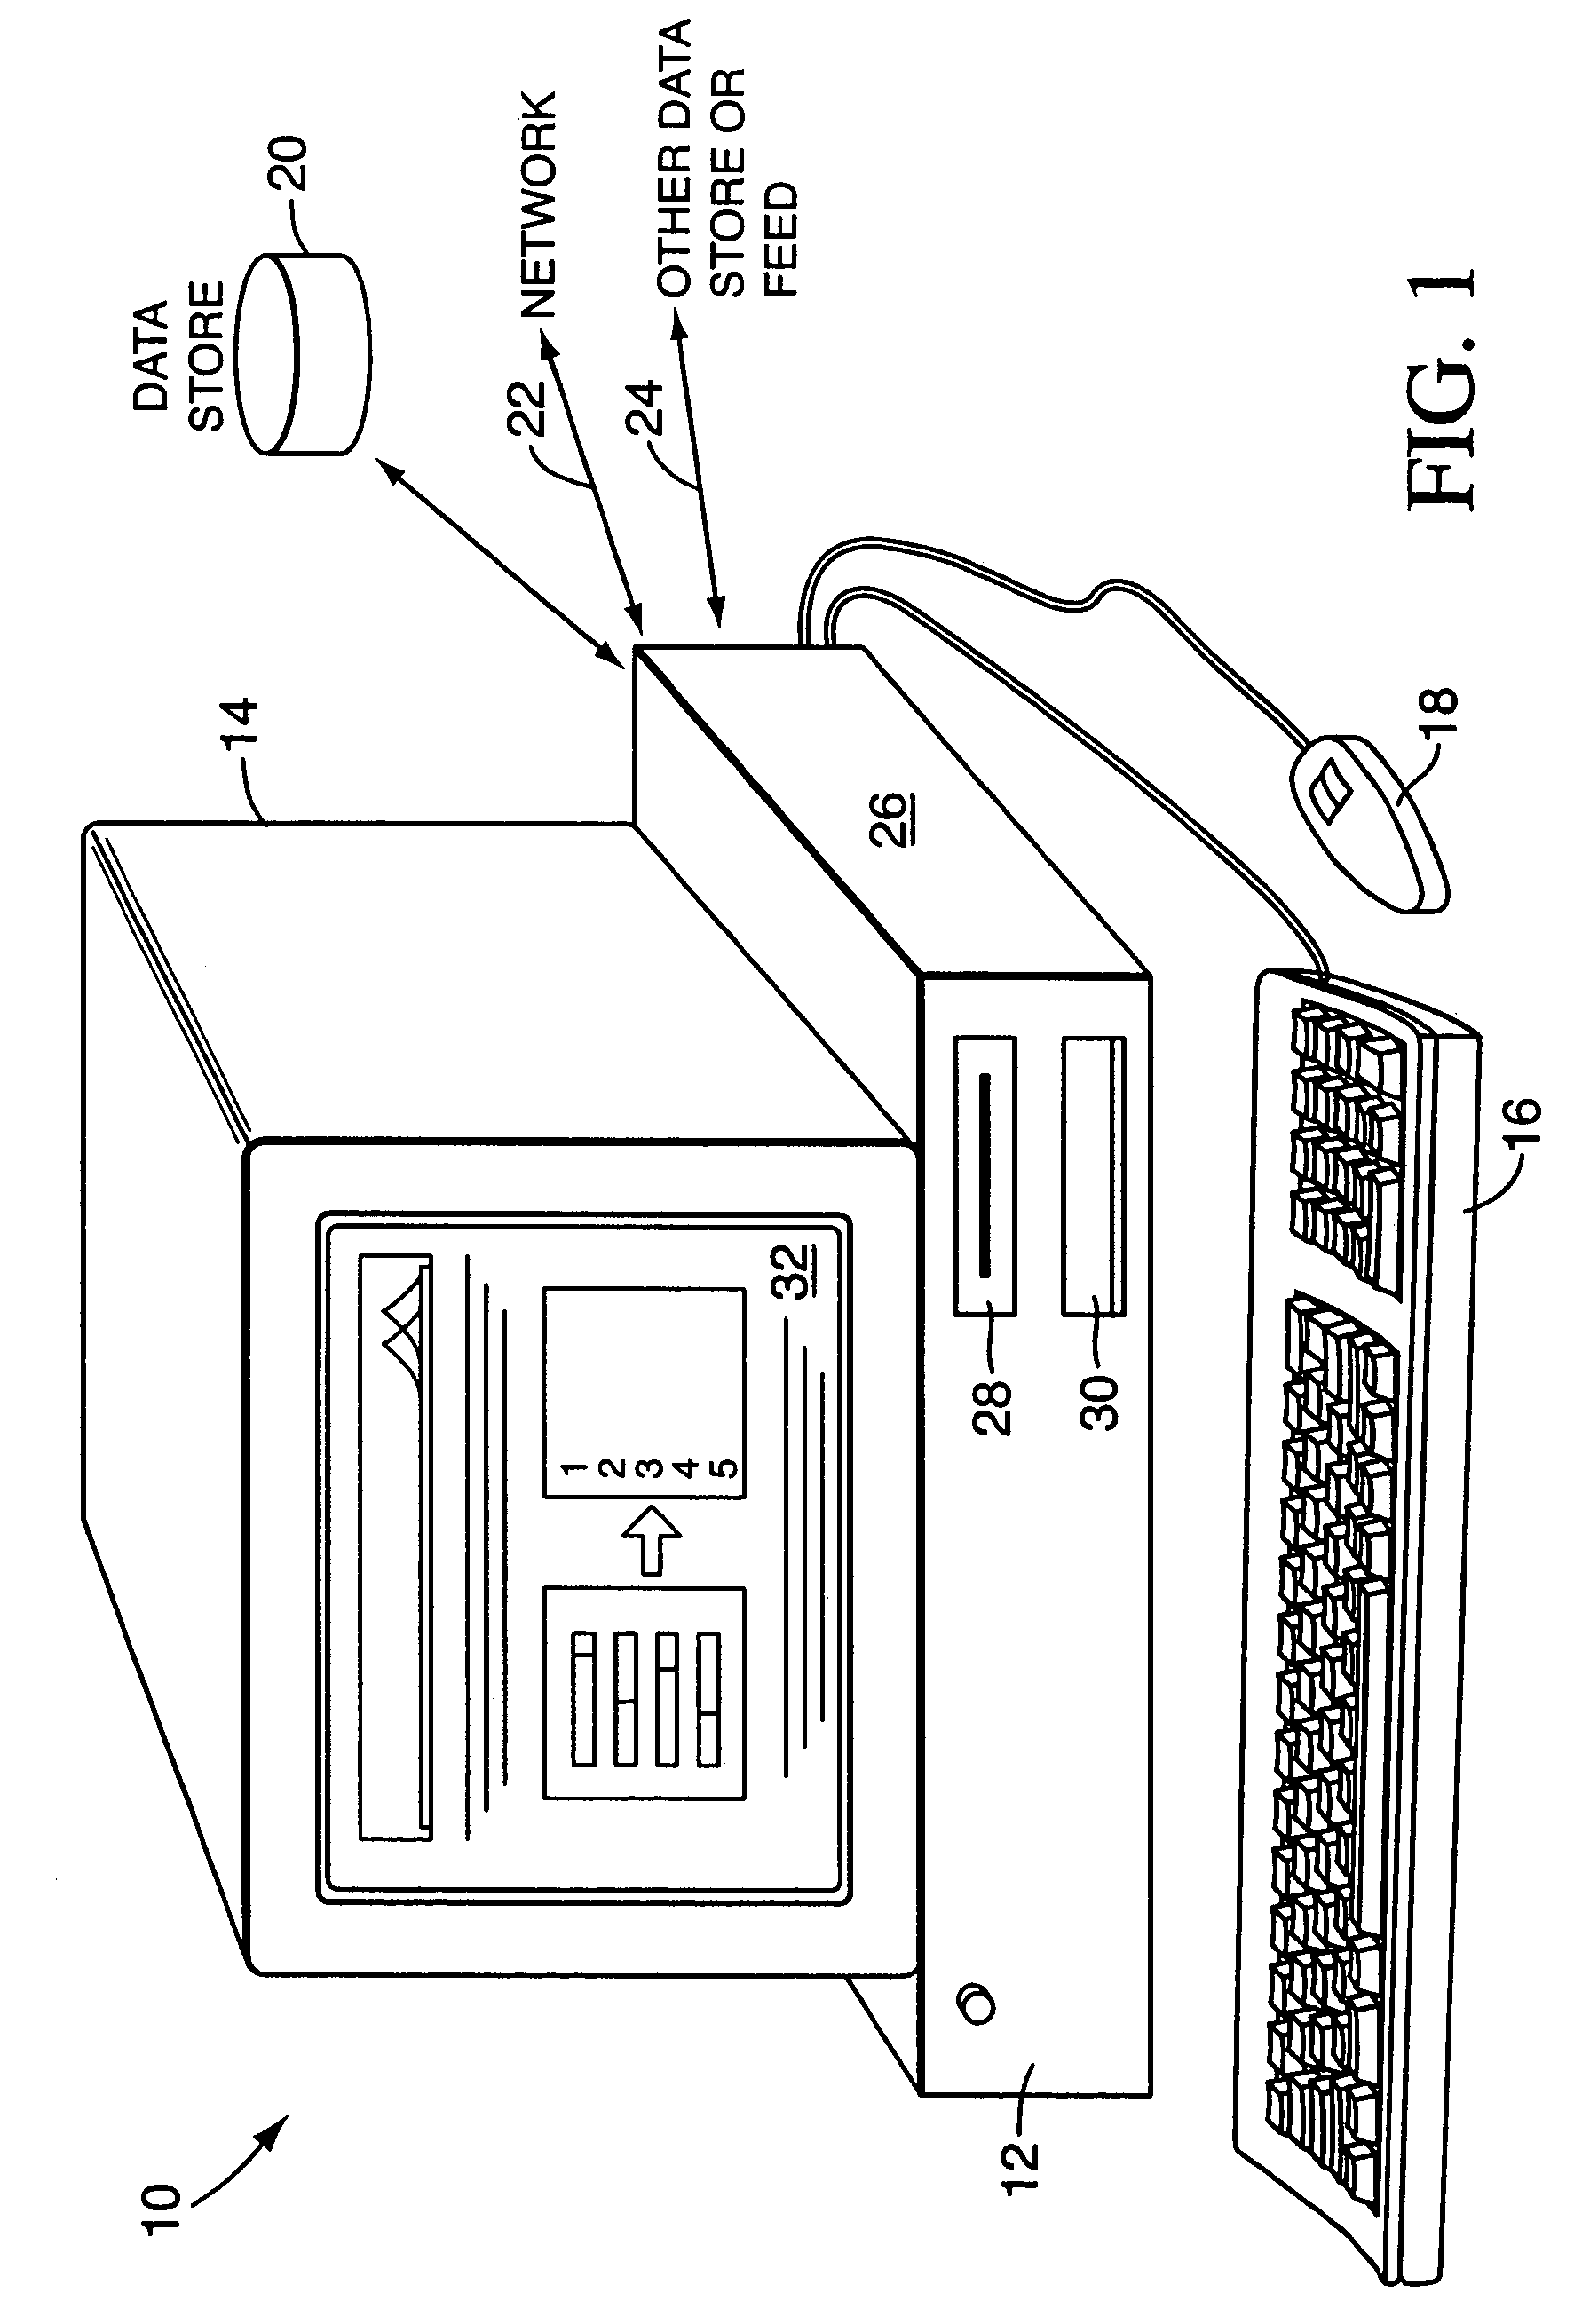 Weighted preference data search system and method